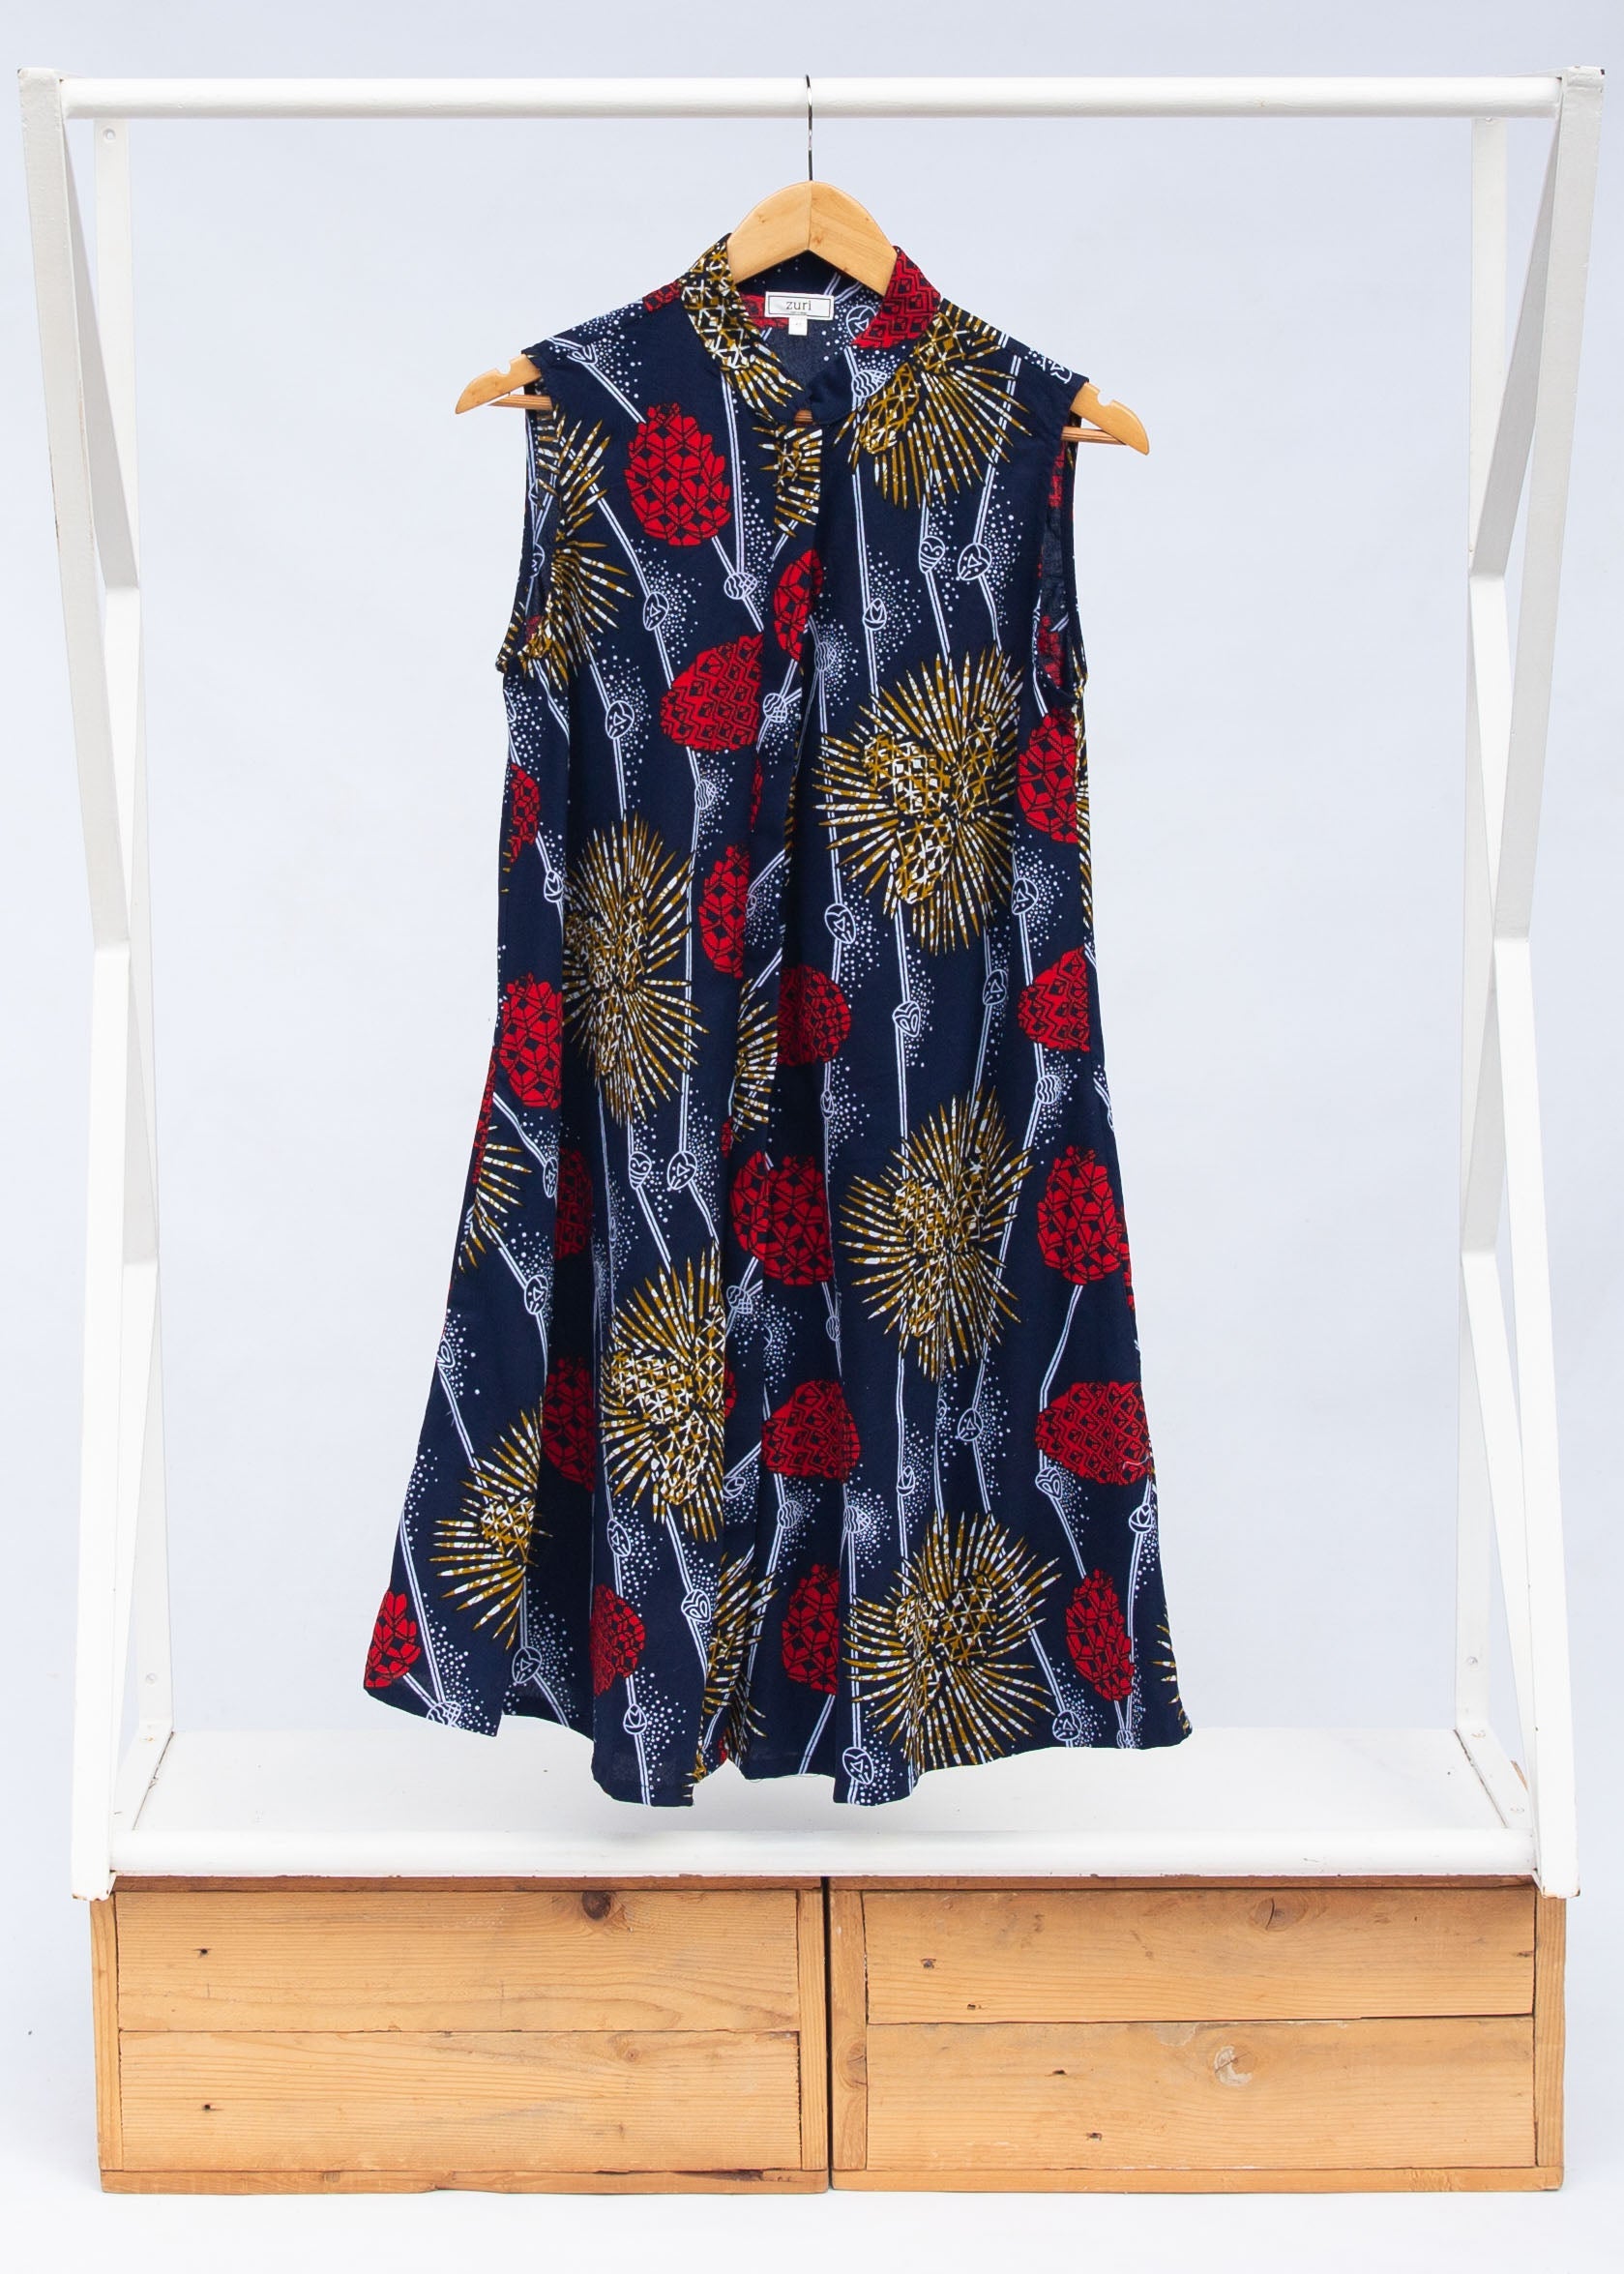 Display of navy sleeveless dress with red, yellow and white splatter print. 